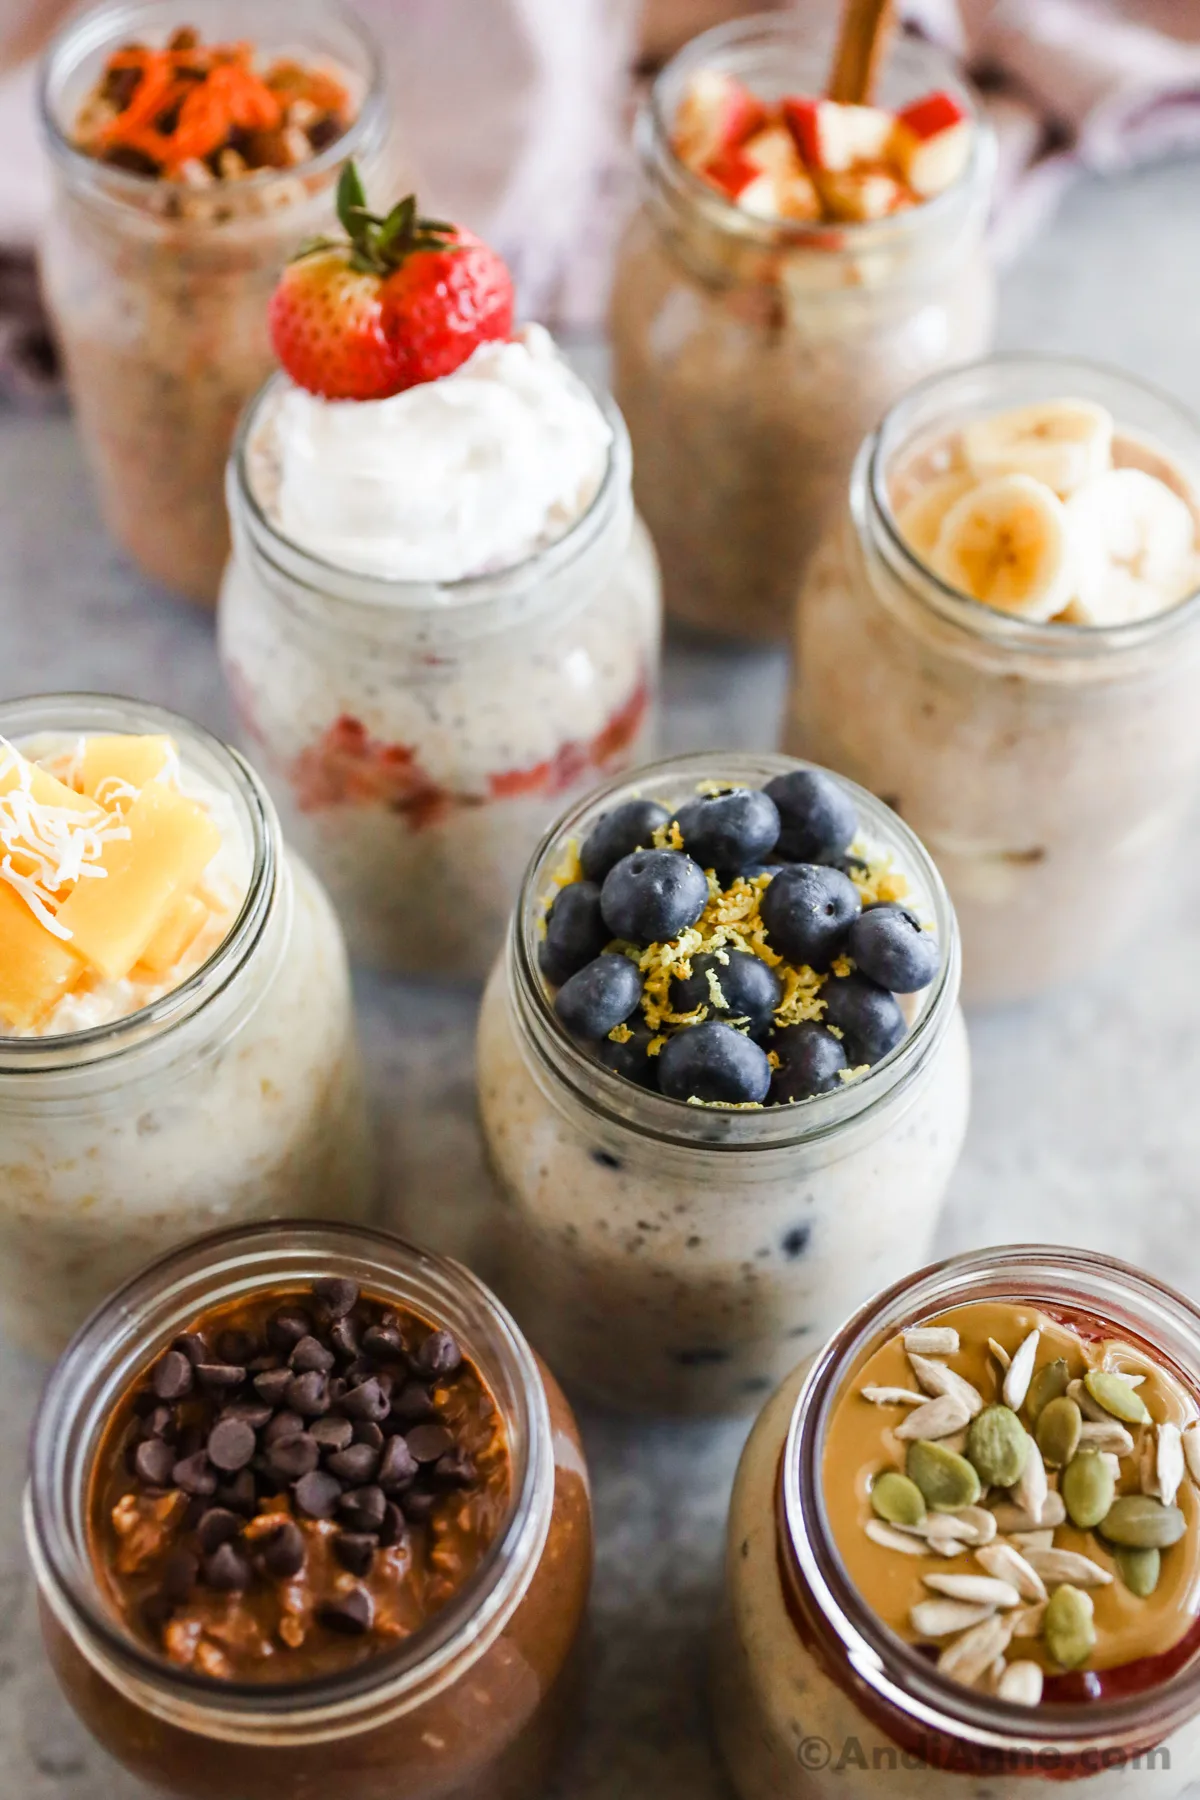 Various overnight oats recipes, all with different toppings made from different fruits, seeds, chocolate chips, and nut butter.